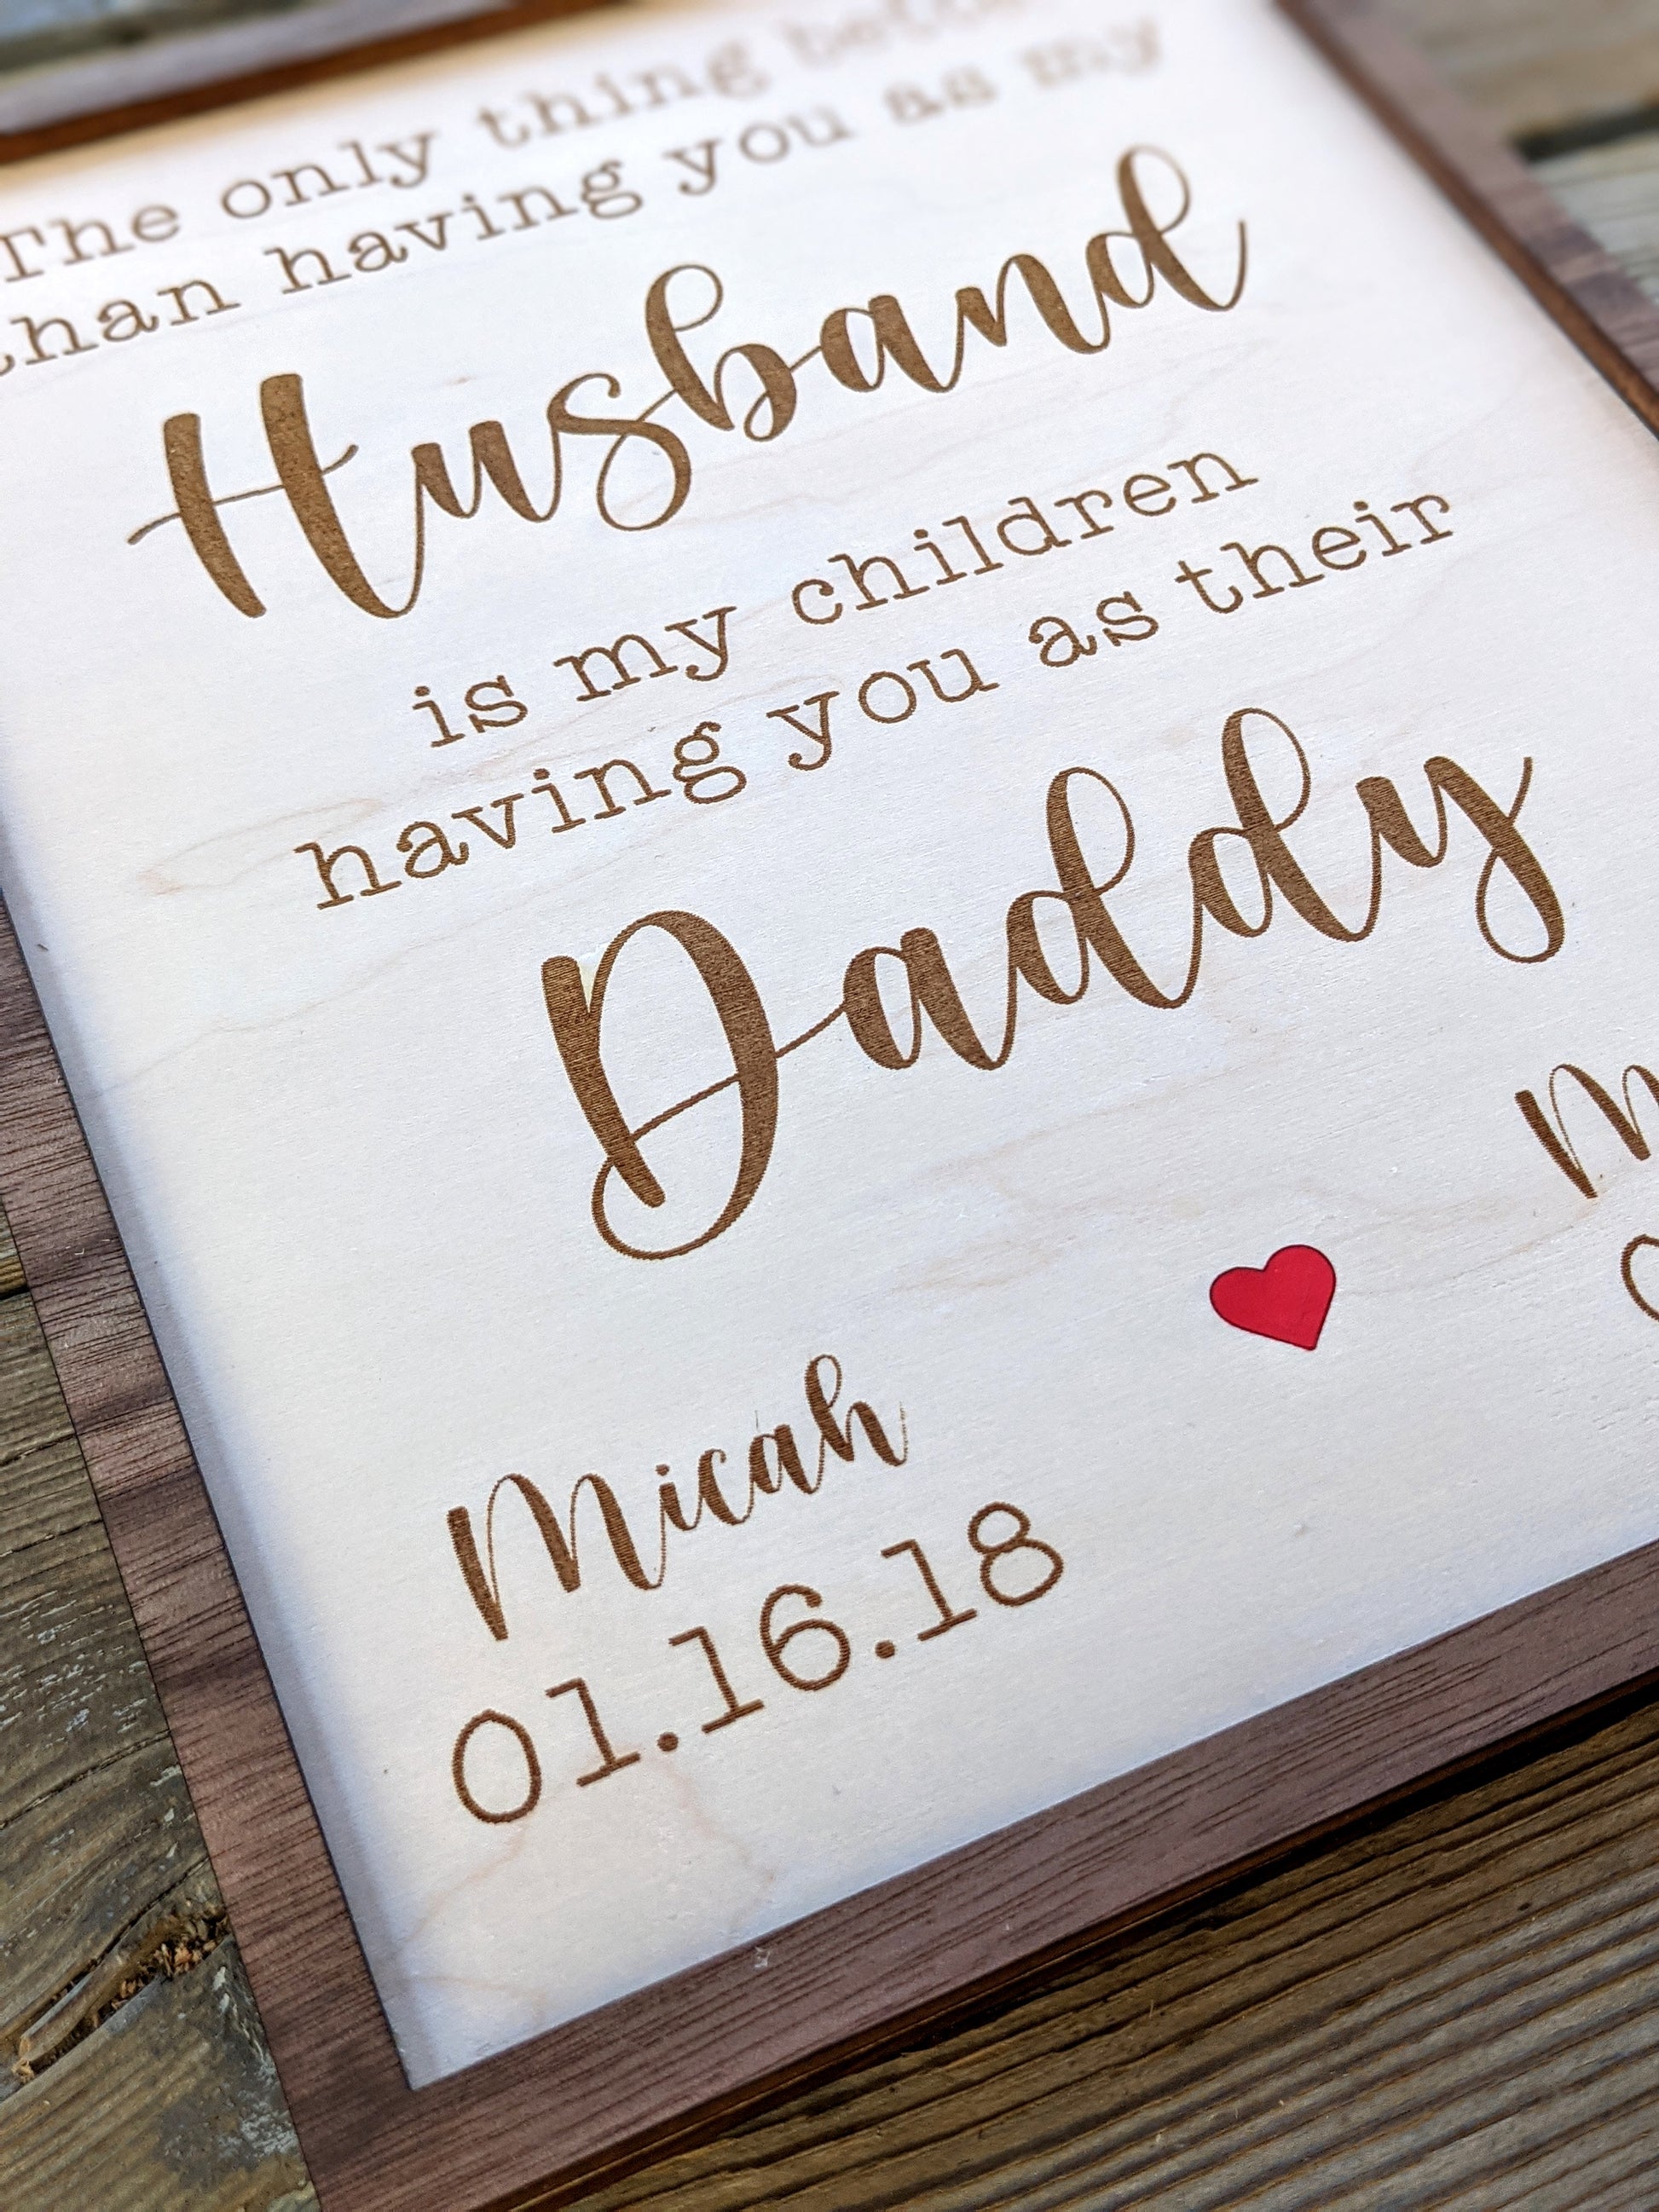 Personalized Sign for Dad Sign 35.00